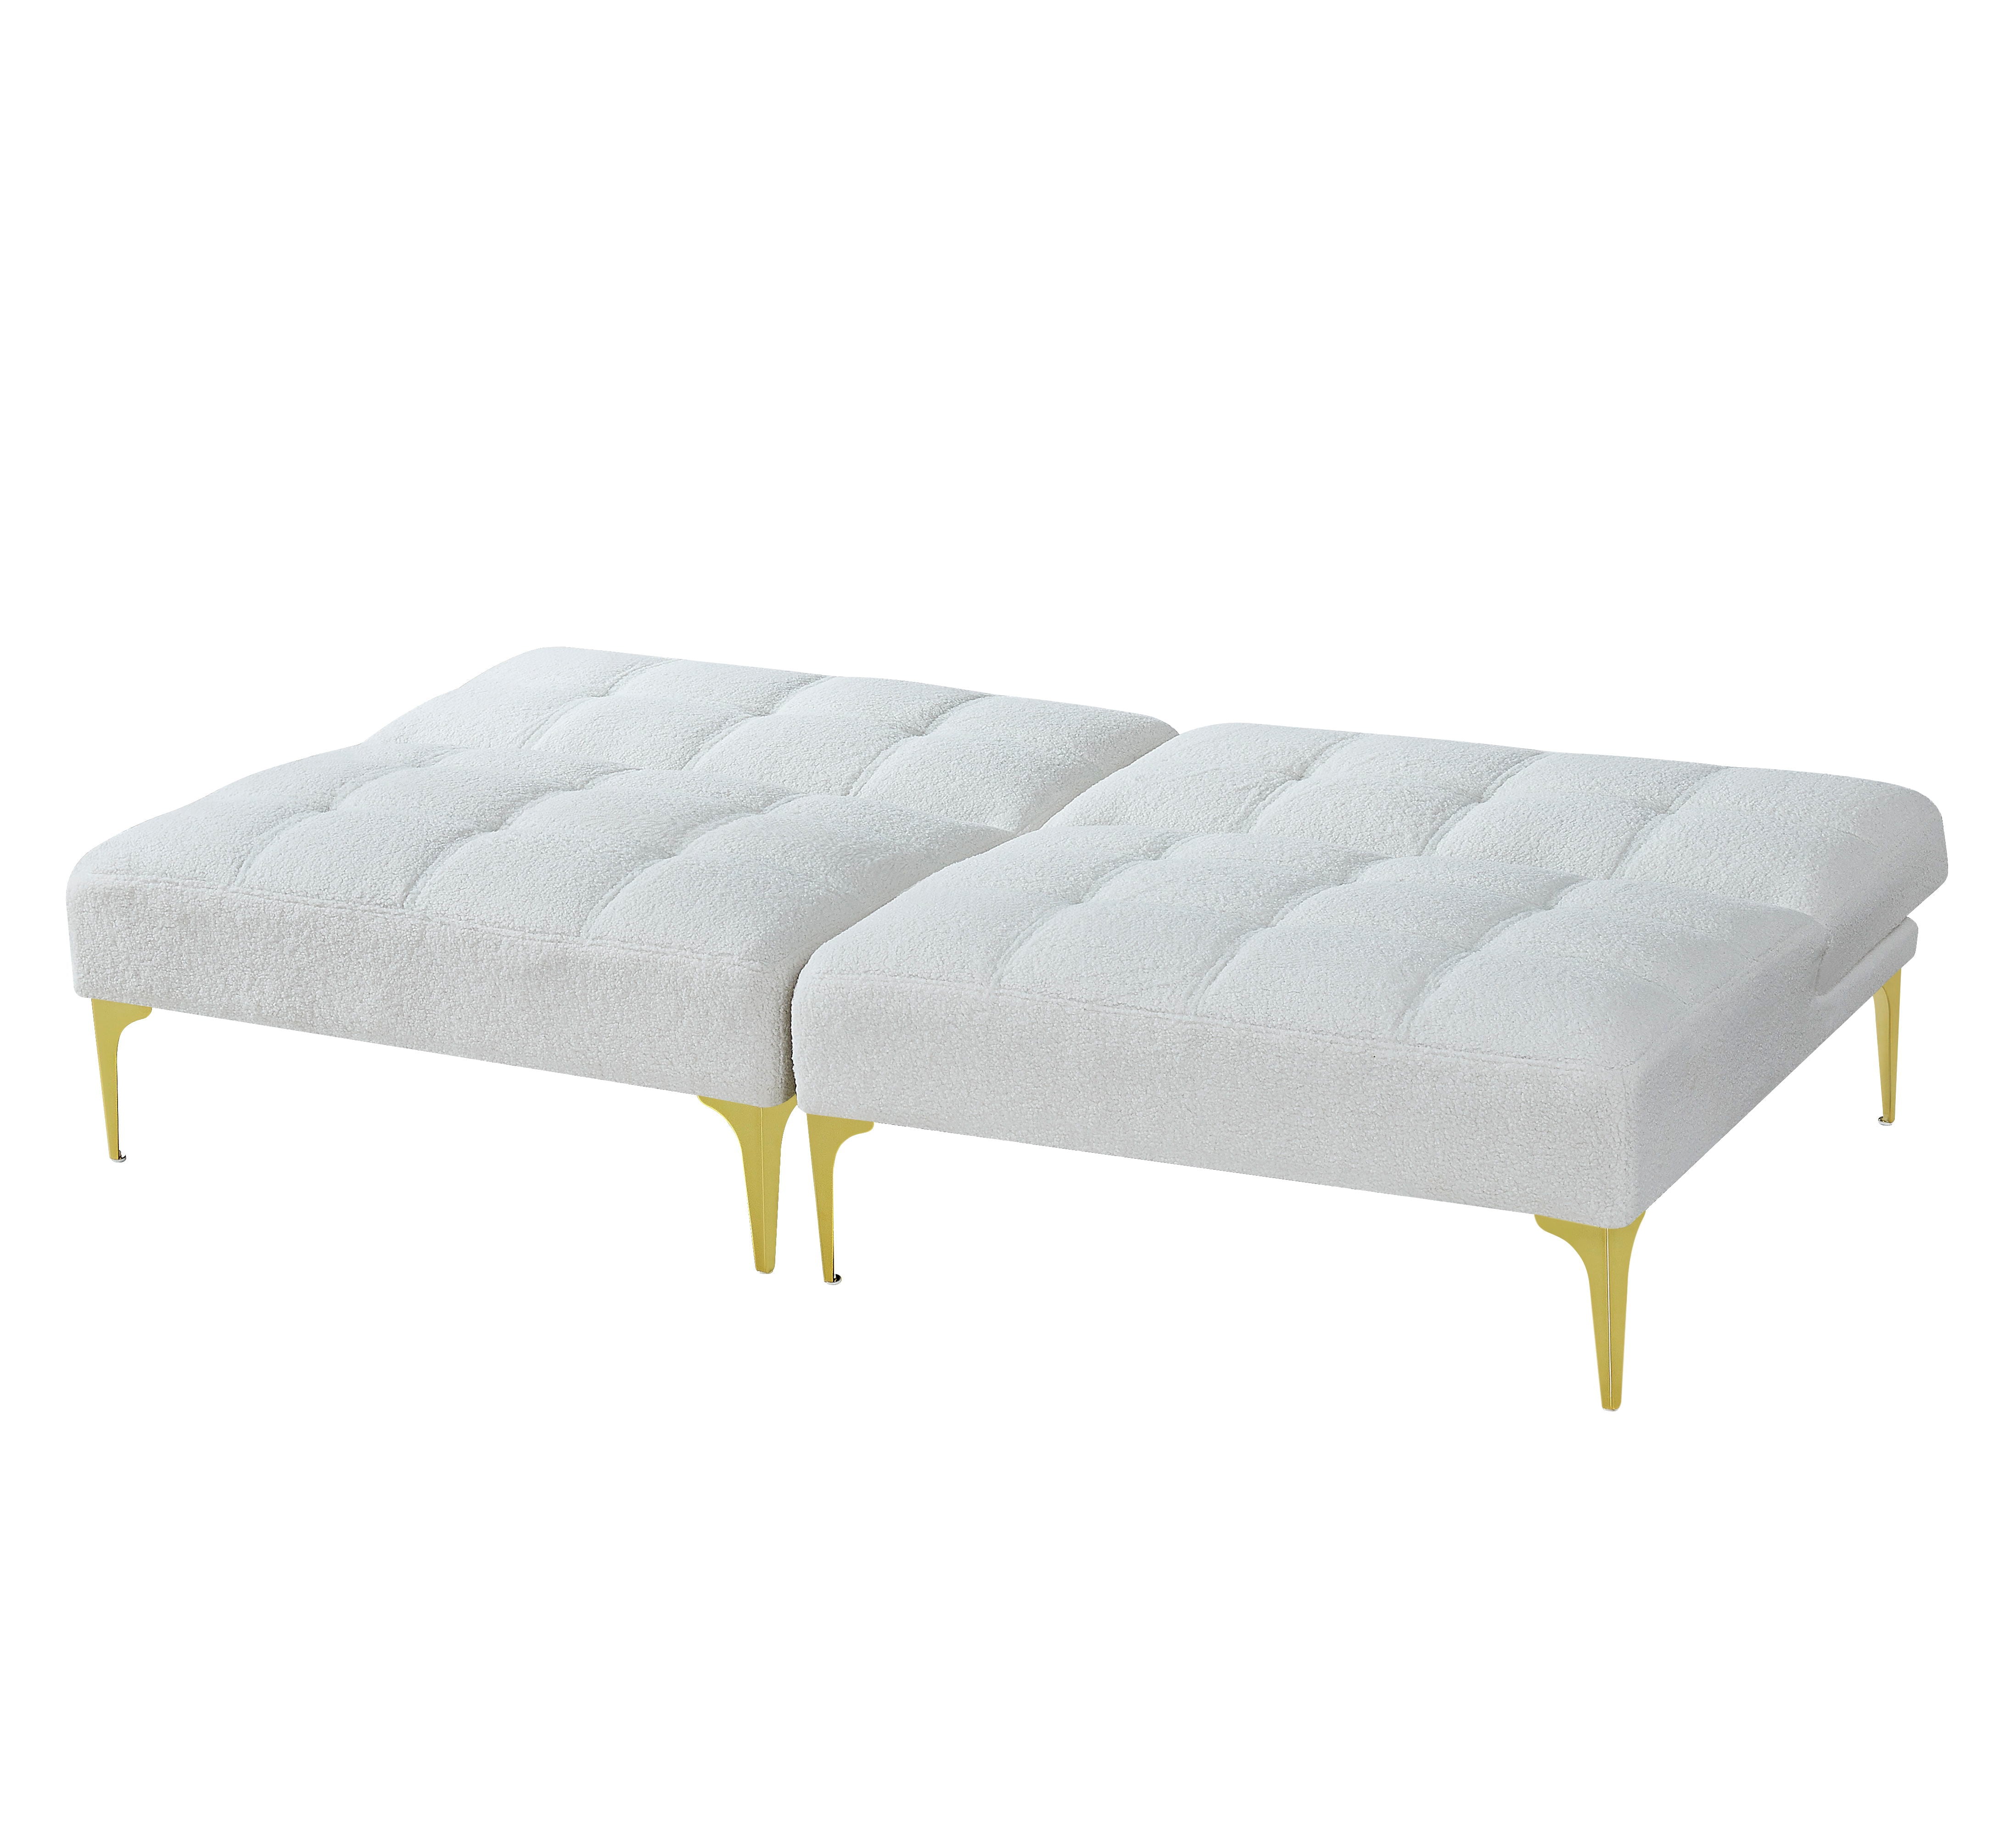 Convertible Sofa Bed Futon With Gold Metal Legs Teddy Fabric White